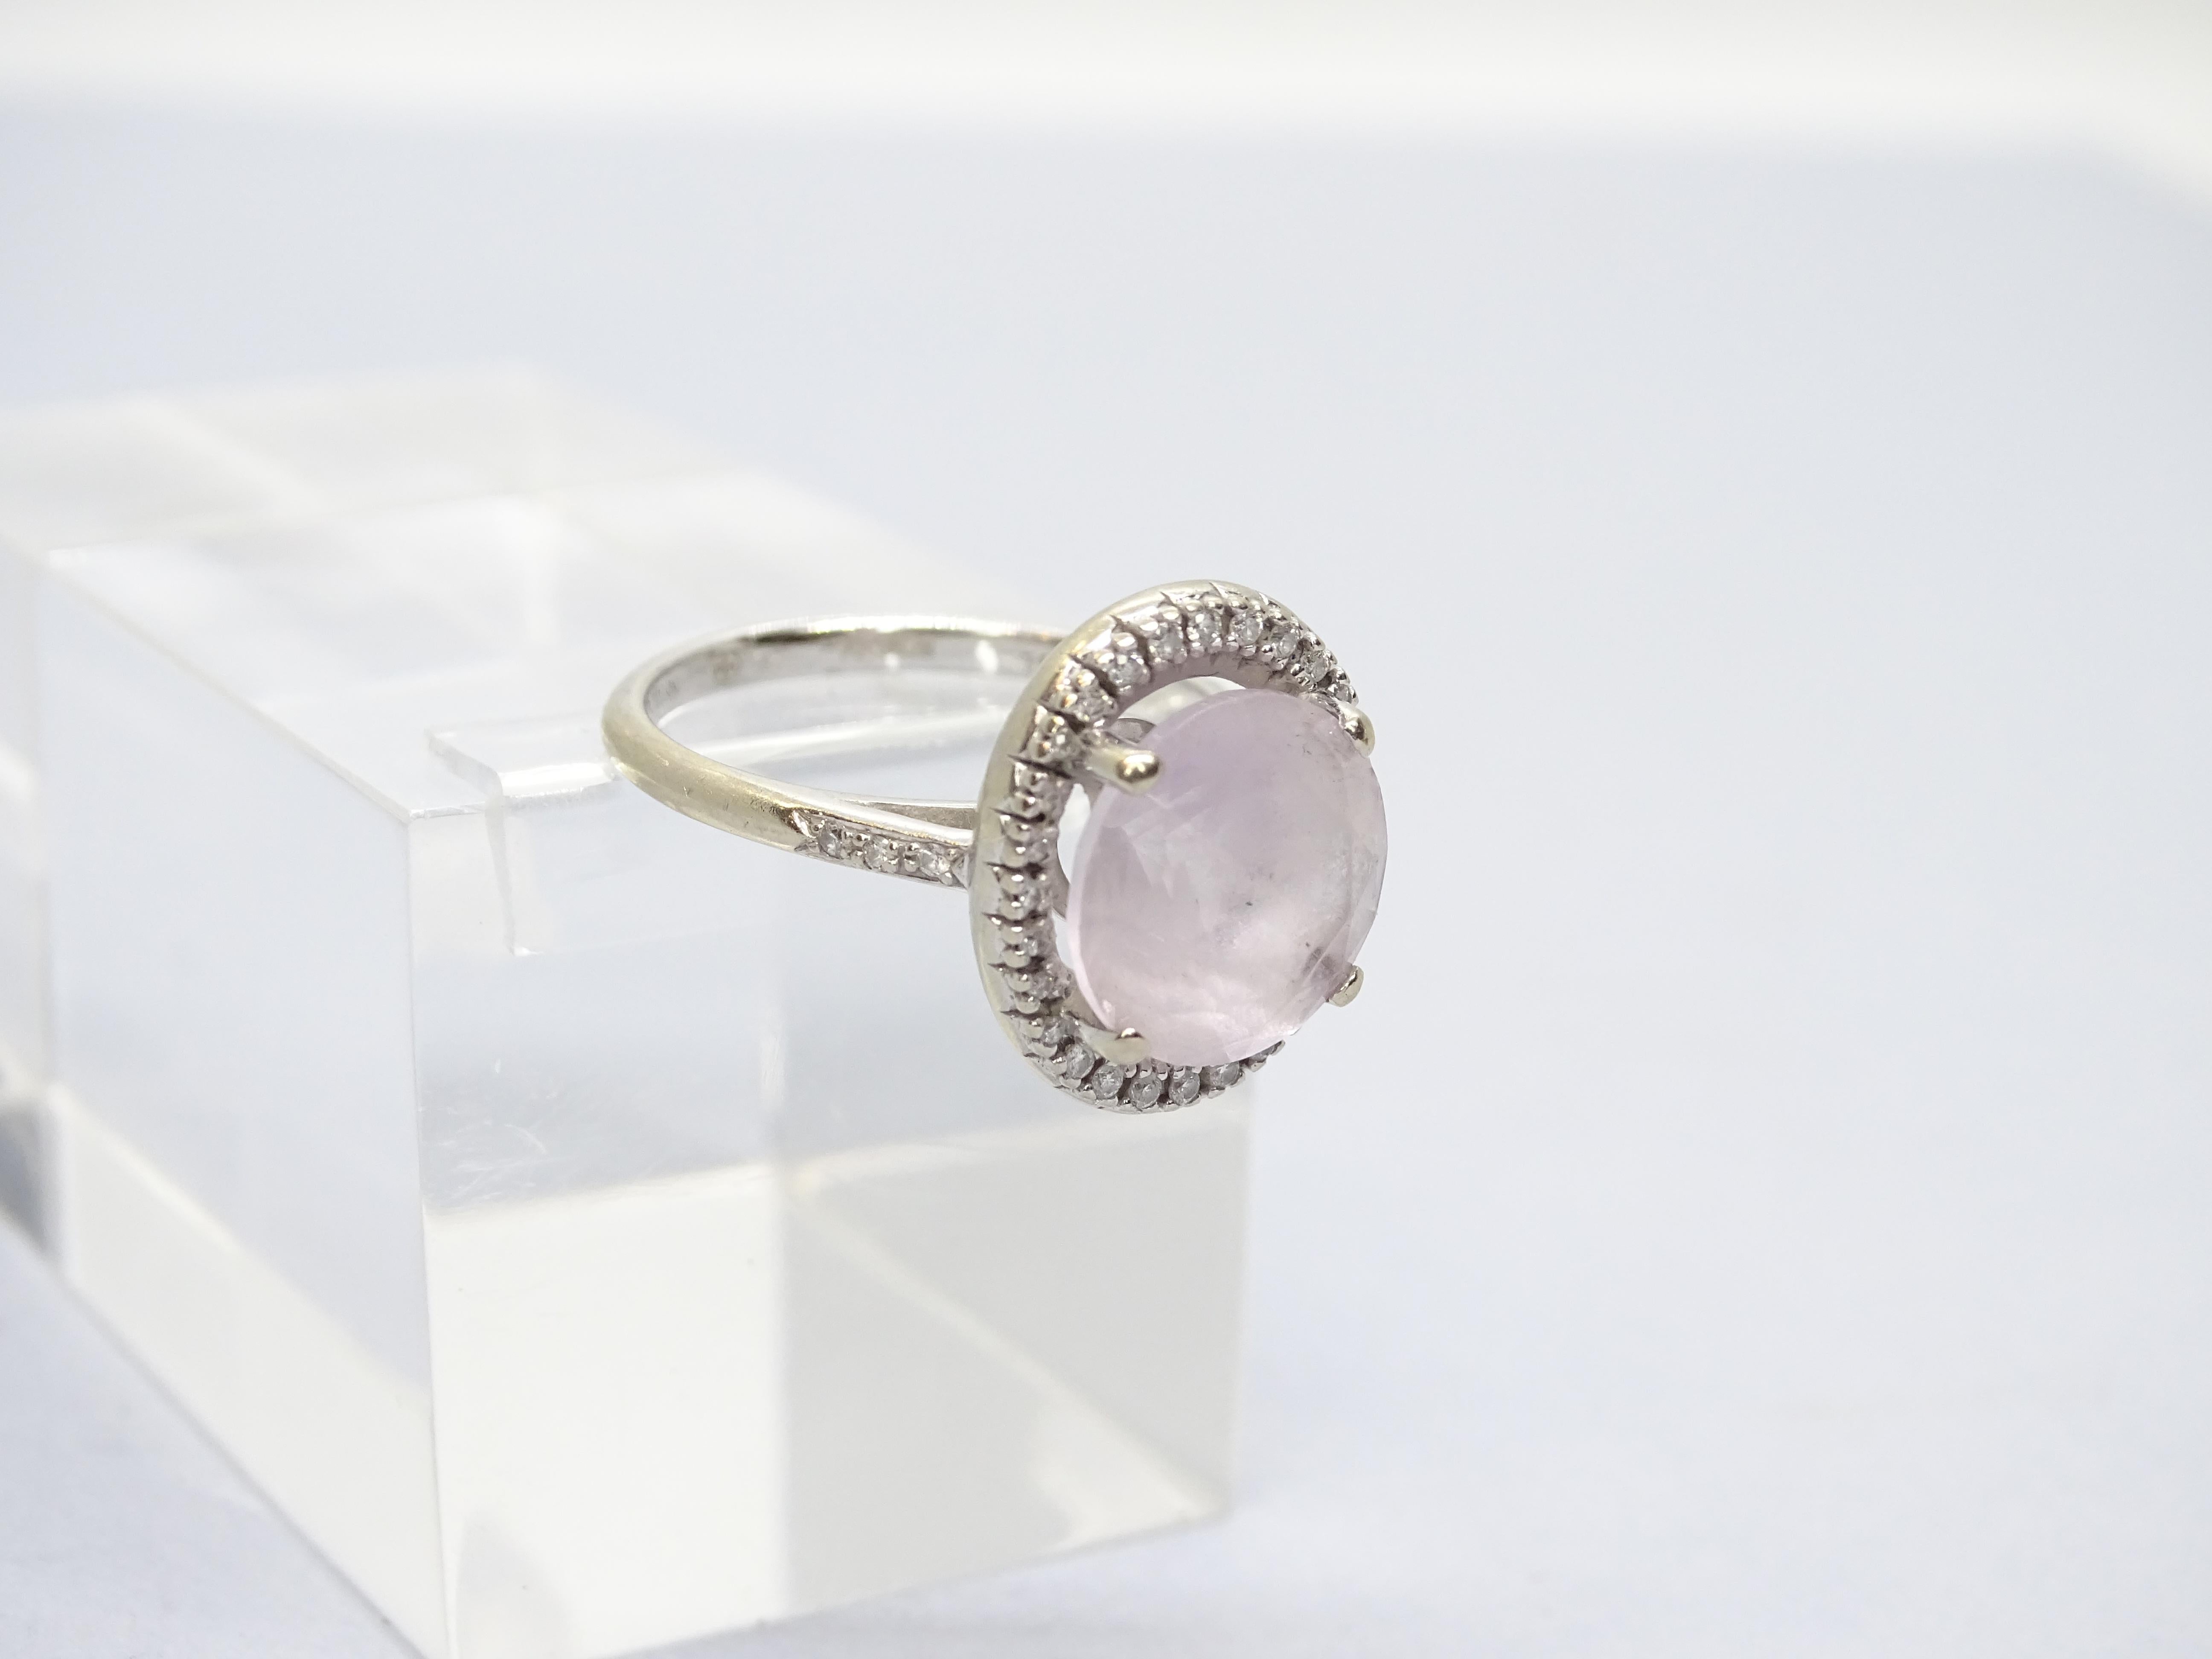 Exceptional 18K white gold ring with a large brilliant-cut central pink amethyst as the protagonist, set in claws. In the halo, slightly oval in shape, there are 28 small diamonds, also brilliant cut and set in claws that make the main stone stand